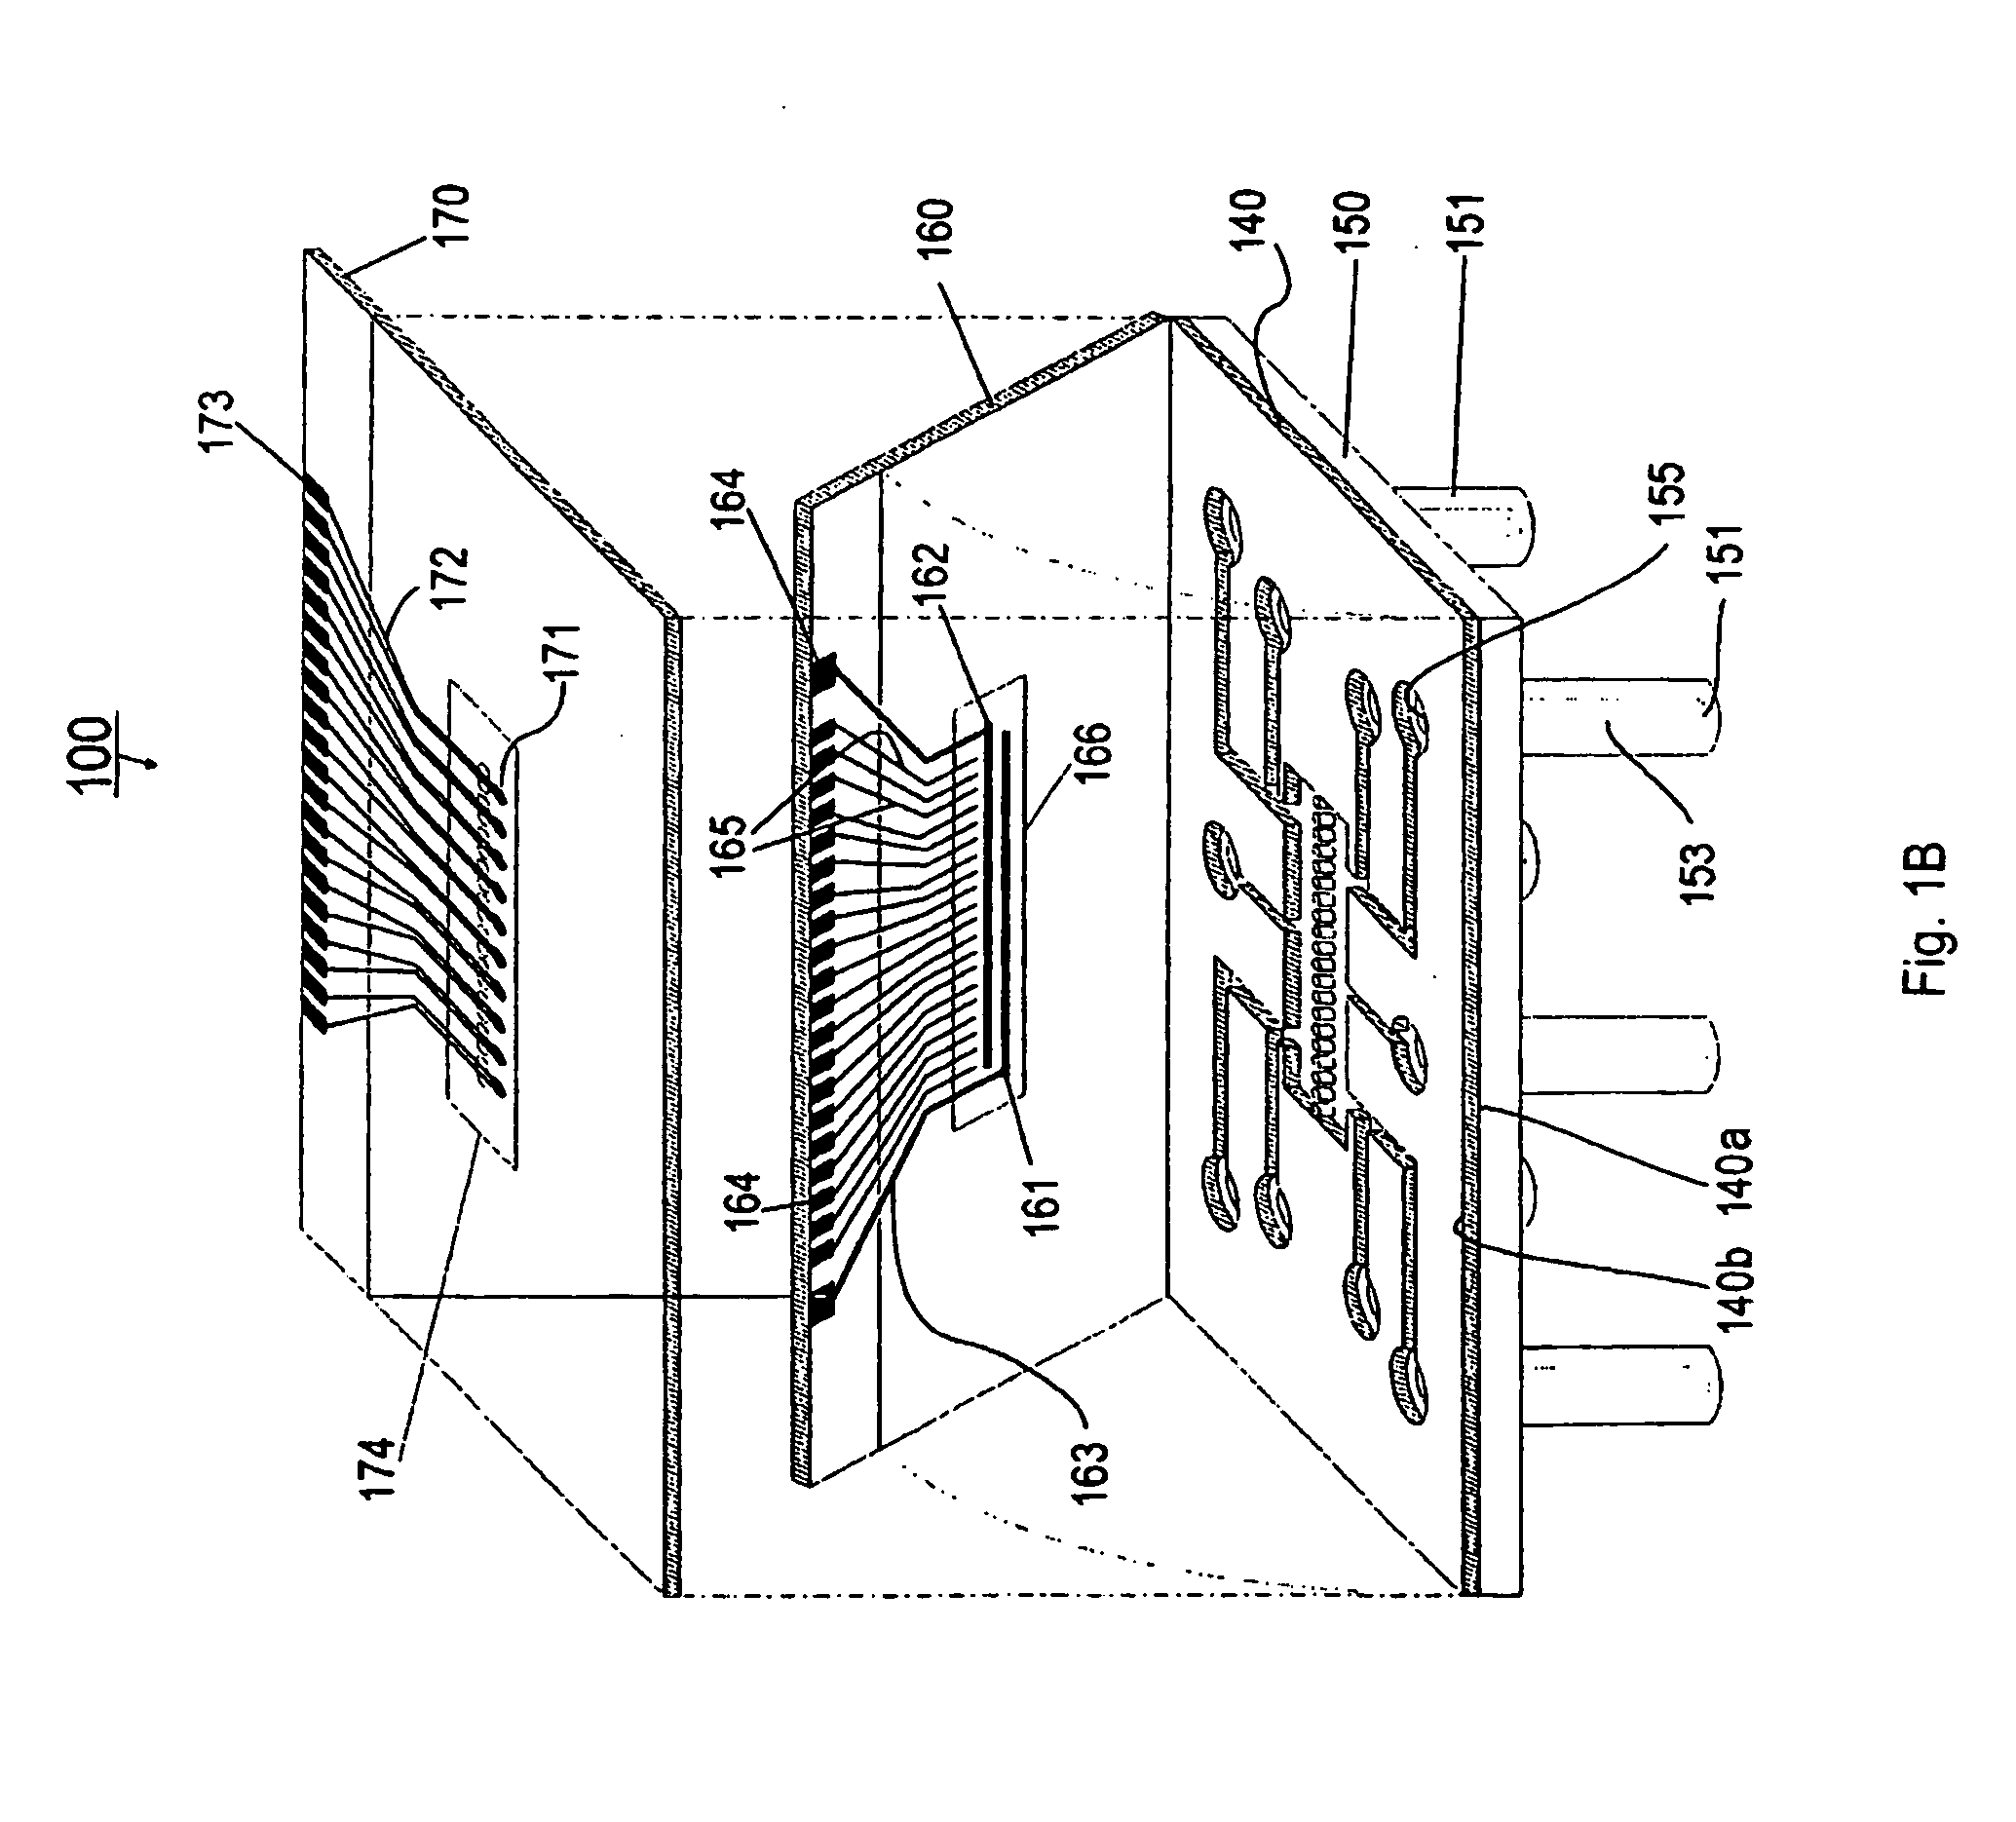 Bioreactors with substance injection capacity